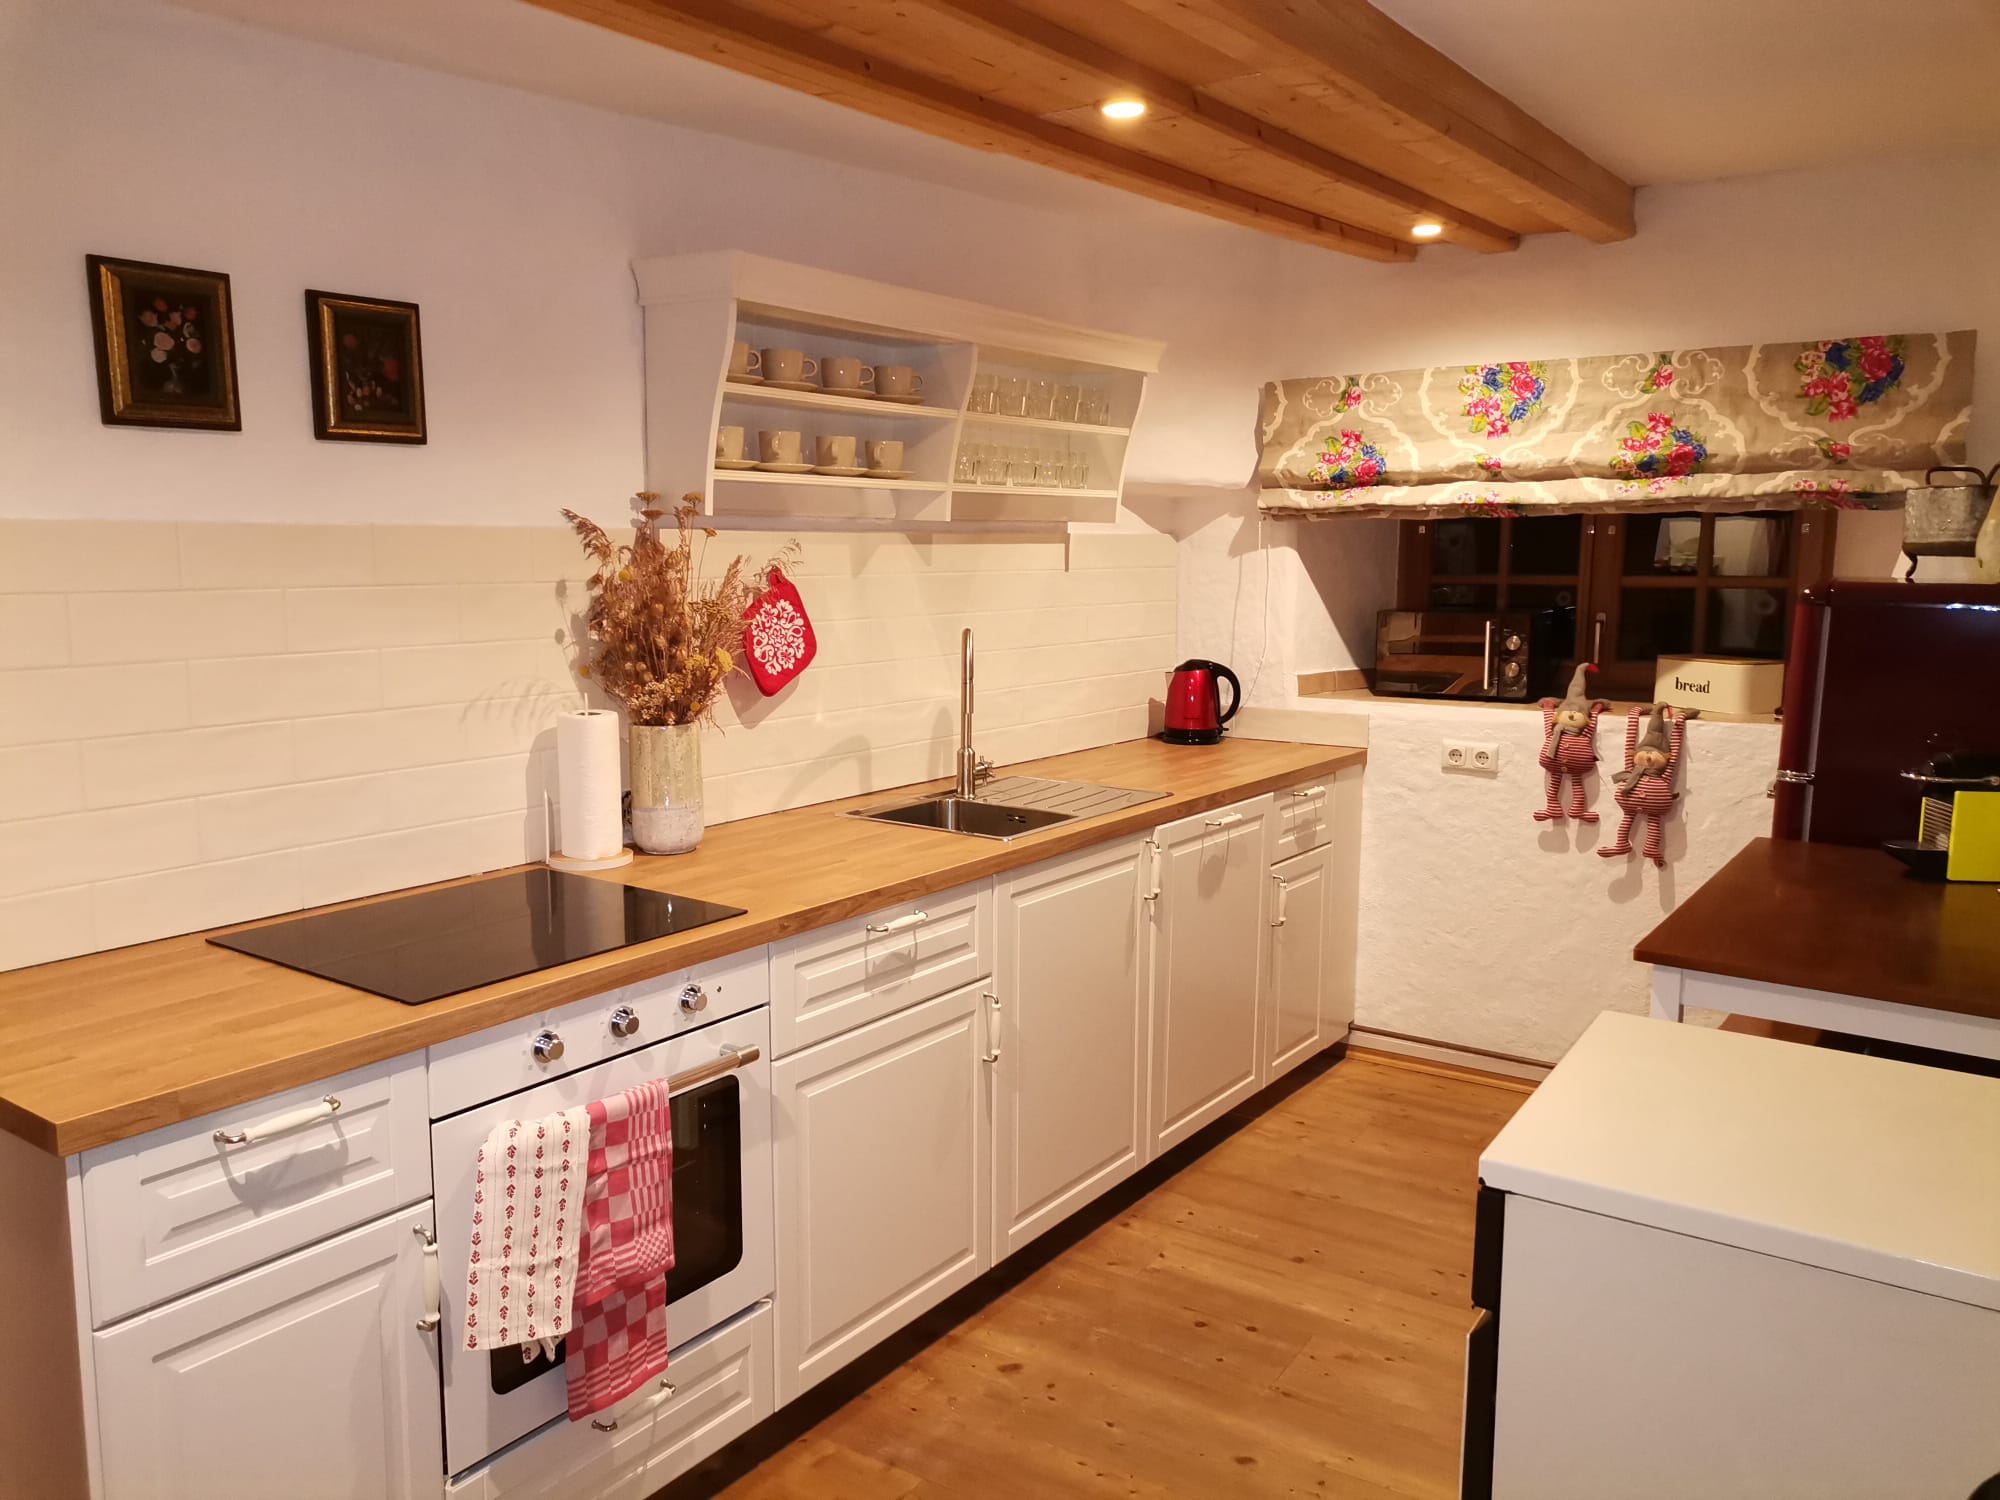 Kitchen in the country house